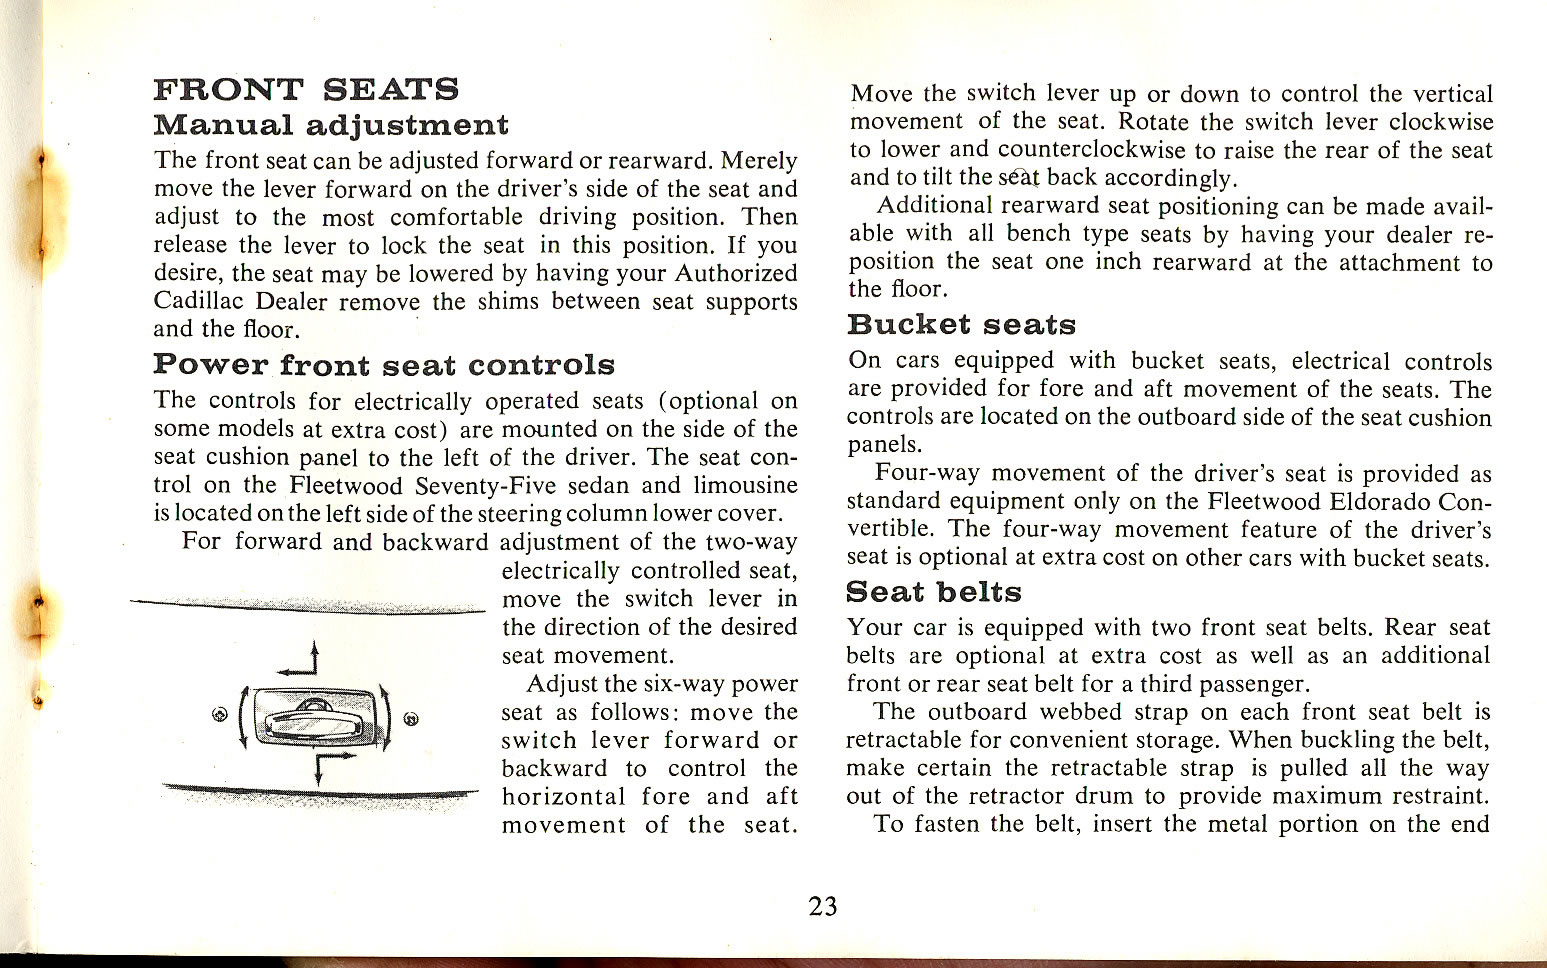 1965 Cadillac Owners Manual Page 38